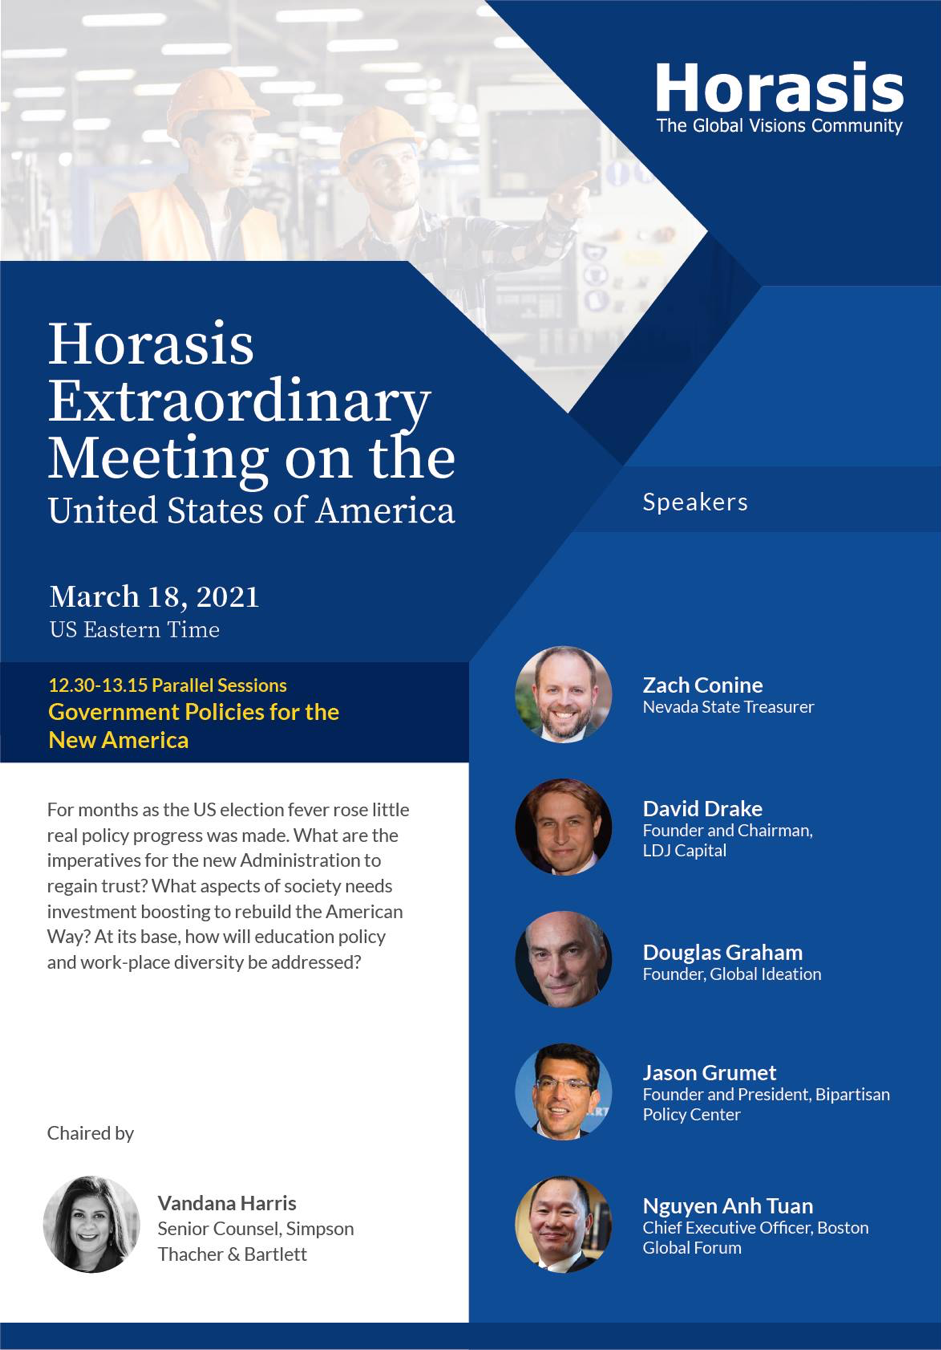 Nguyen Anh Tuan spoke at the Horasis Extraordinary Meeting on the United States of America